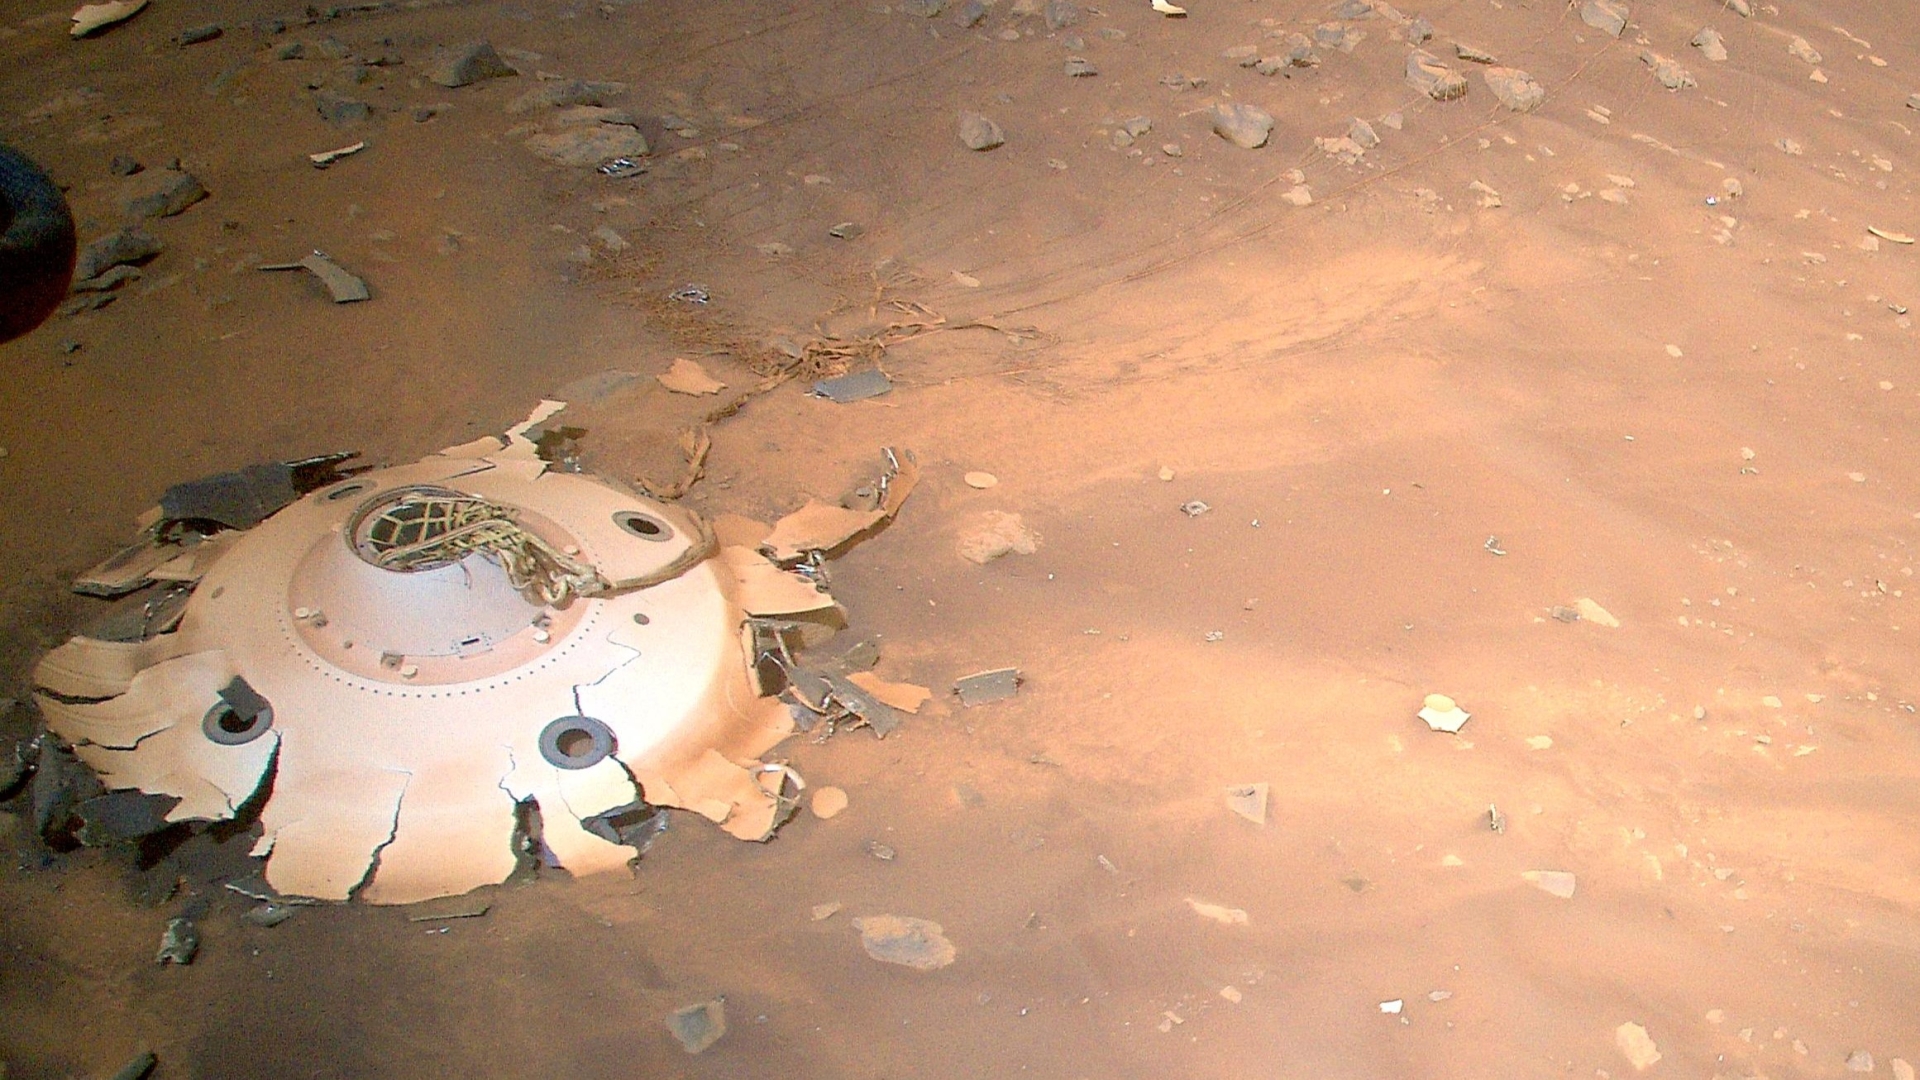 Wreckage on Mars that looks like a 'flying saucer made by ALIENS' revealed